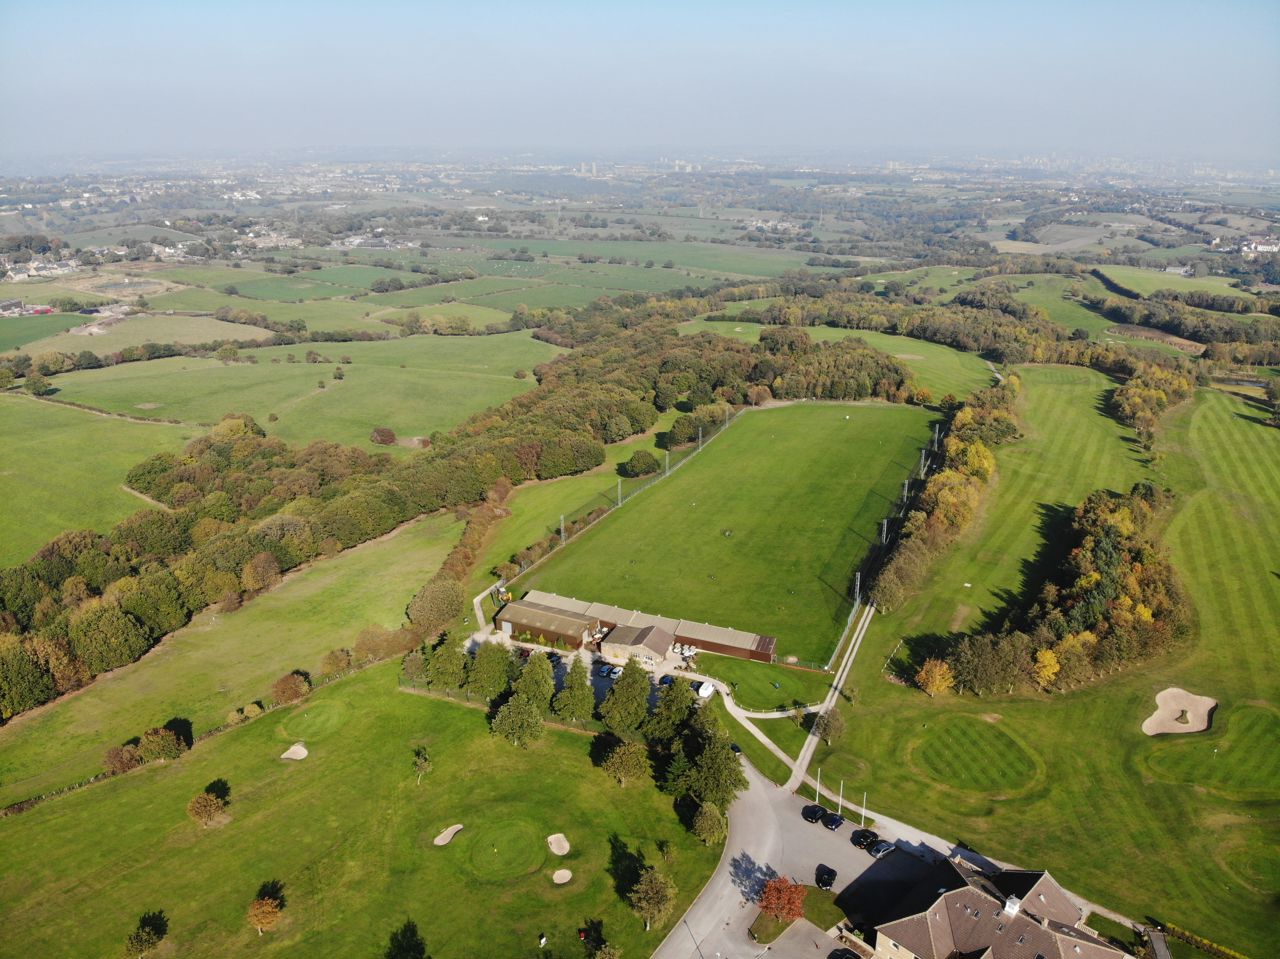 An aerial photo showing the driving range at The Manor, Drighlington, along with the surrounding golf course and farm land. It is a sunny days and the trees are in leaf.